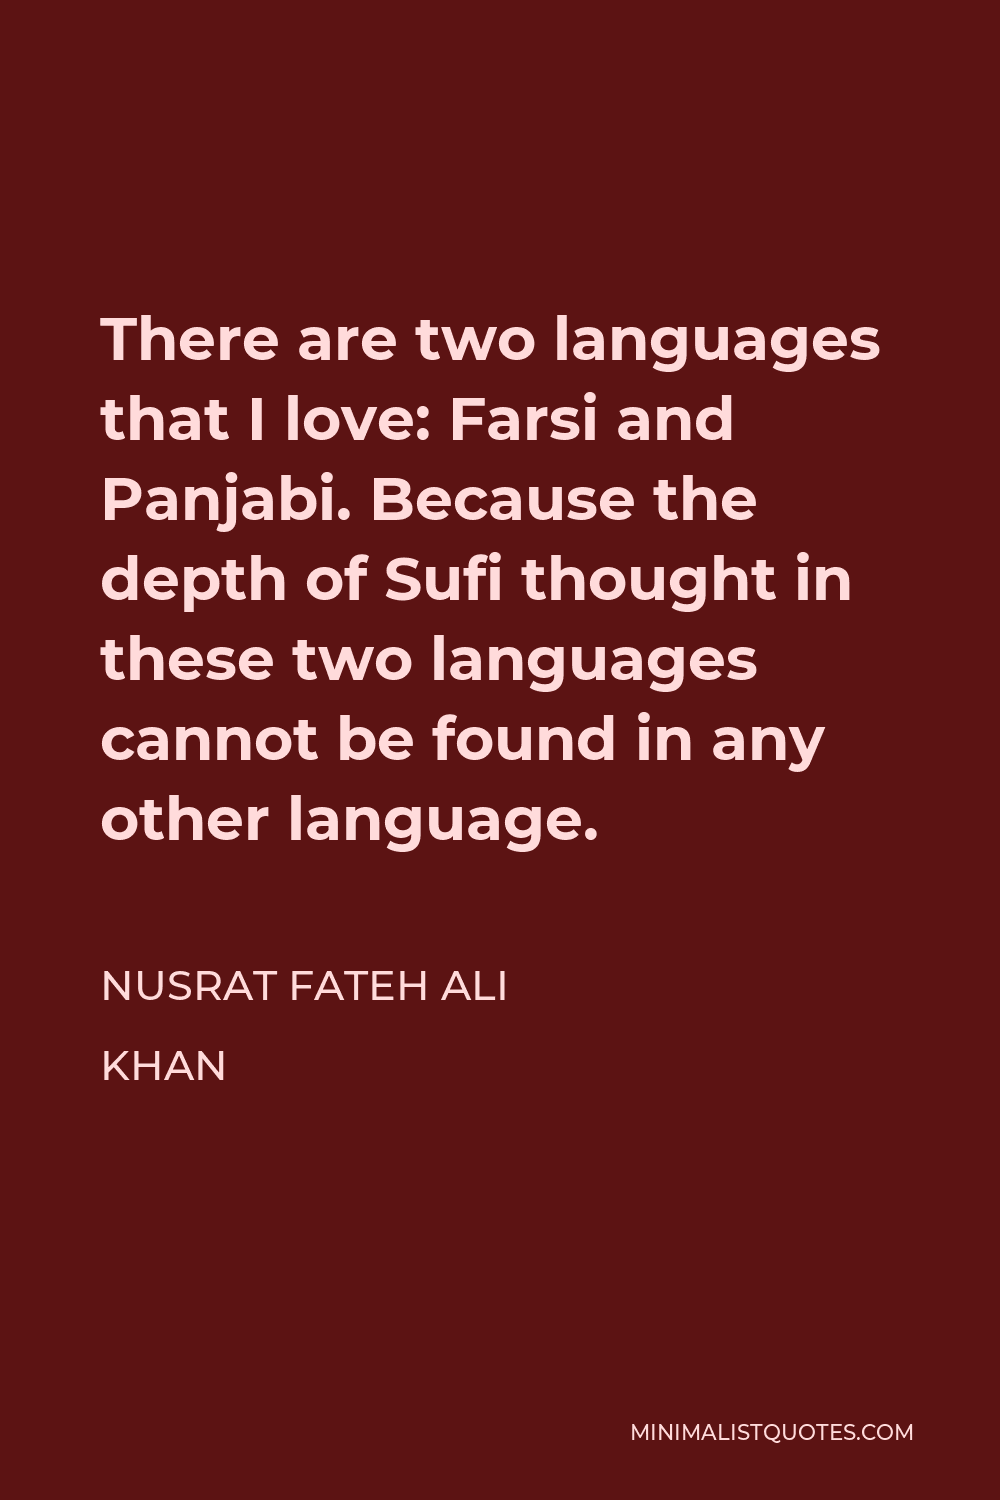 Nusrat Fateh Ali Khan Quote - There are two languages that I love: Farsi and Panjabi. Because the depth of Sufi thought in these two languages cannot be found in any other language.